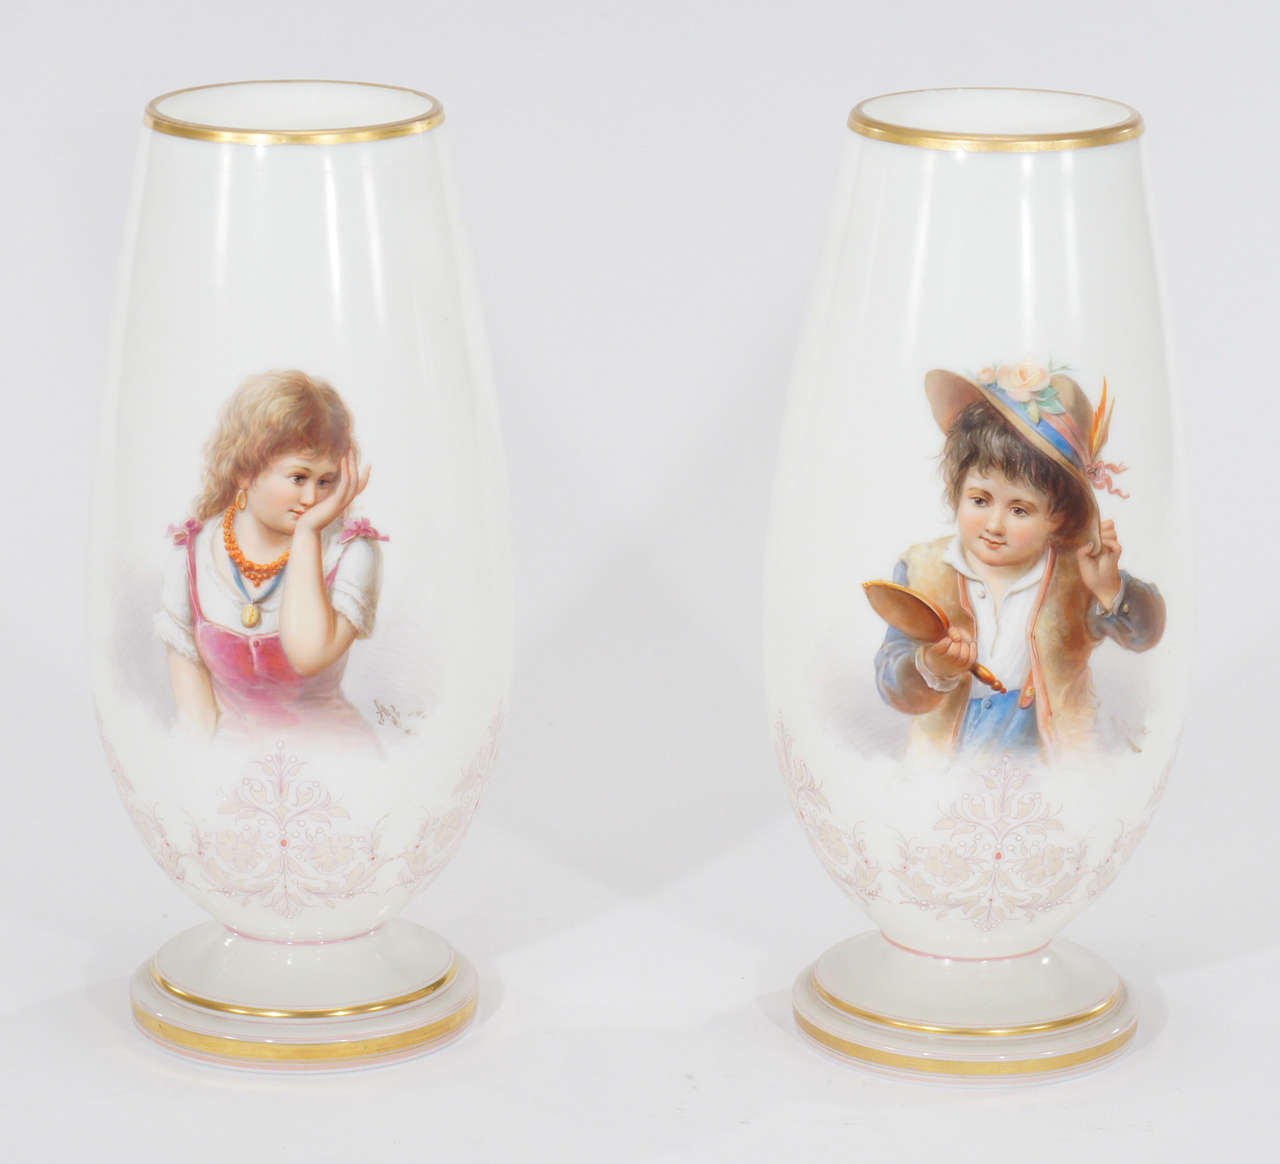 This is a wonderful pair of hand blown Bohemian glass vases with detailed and charming portraits in hand painted enamels. The large size makes them especially decorative and the fine detail of the painting is clearly evident. The children are well